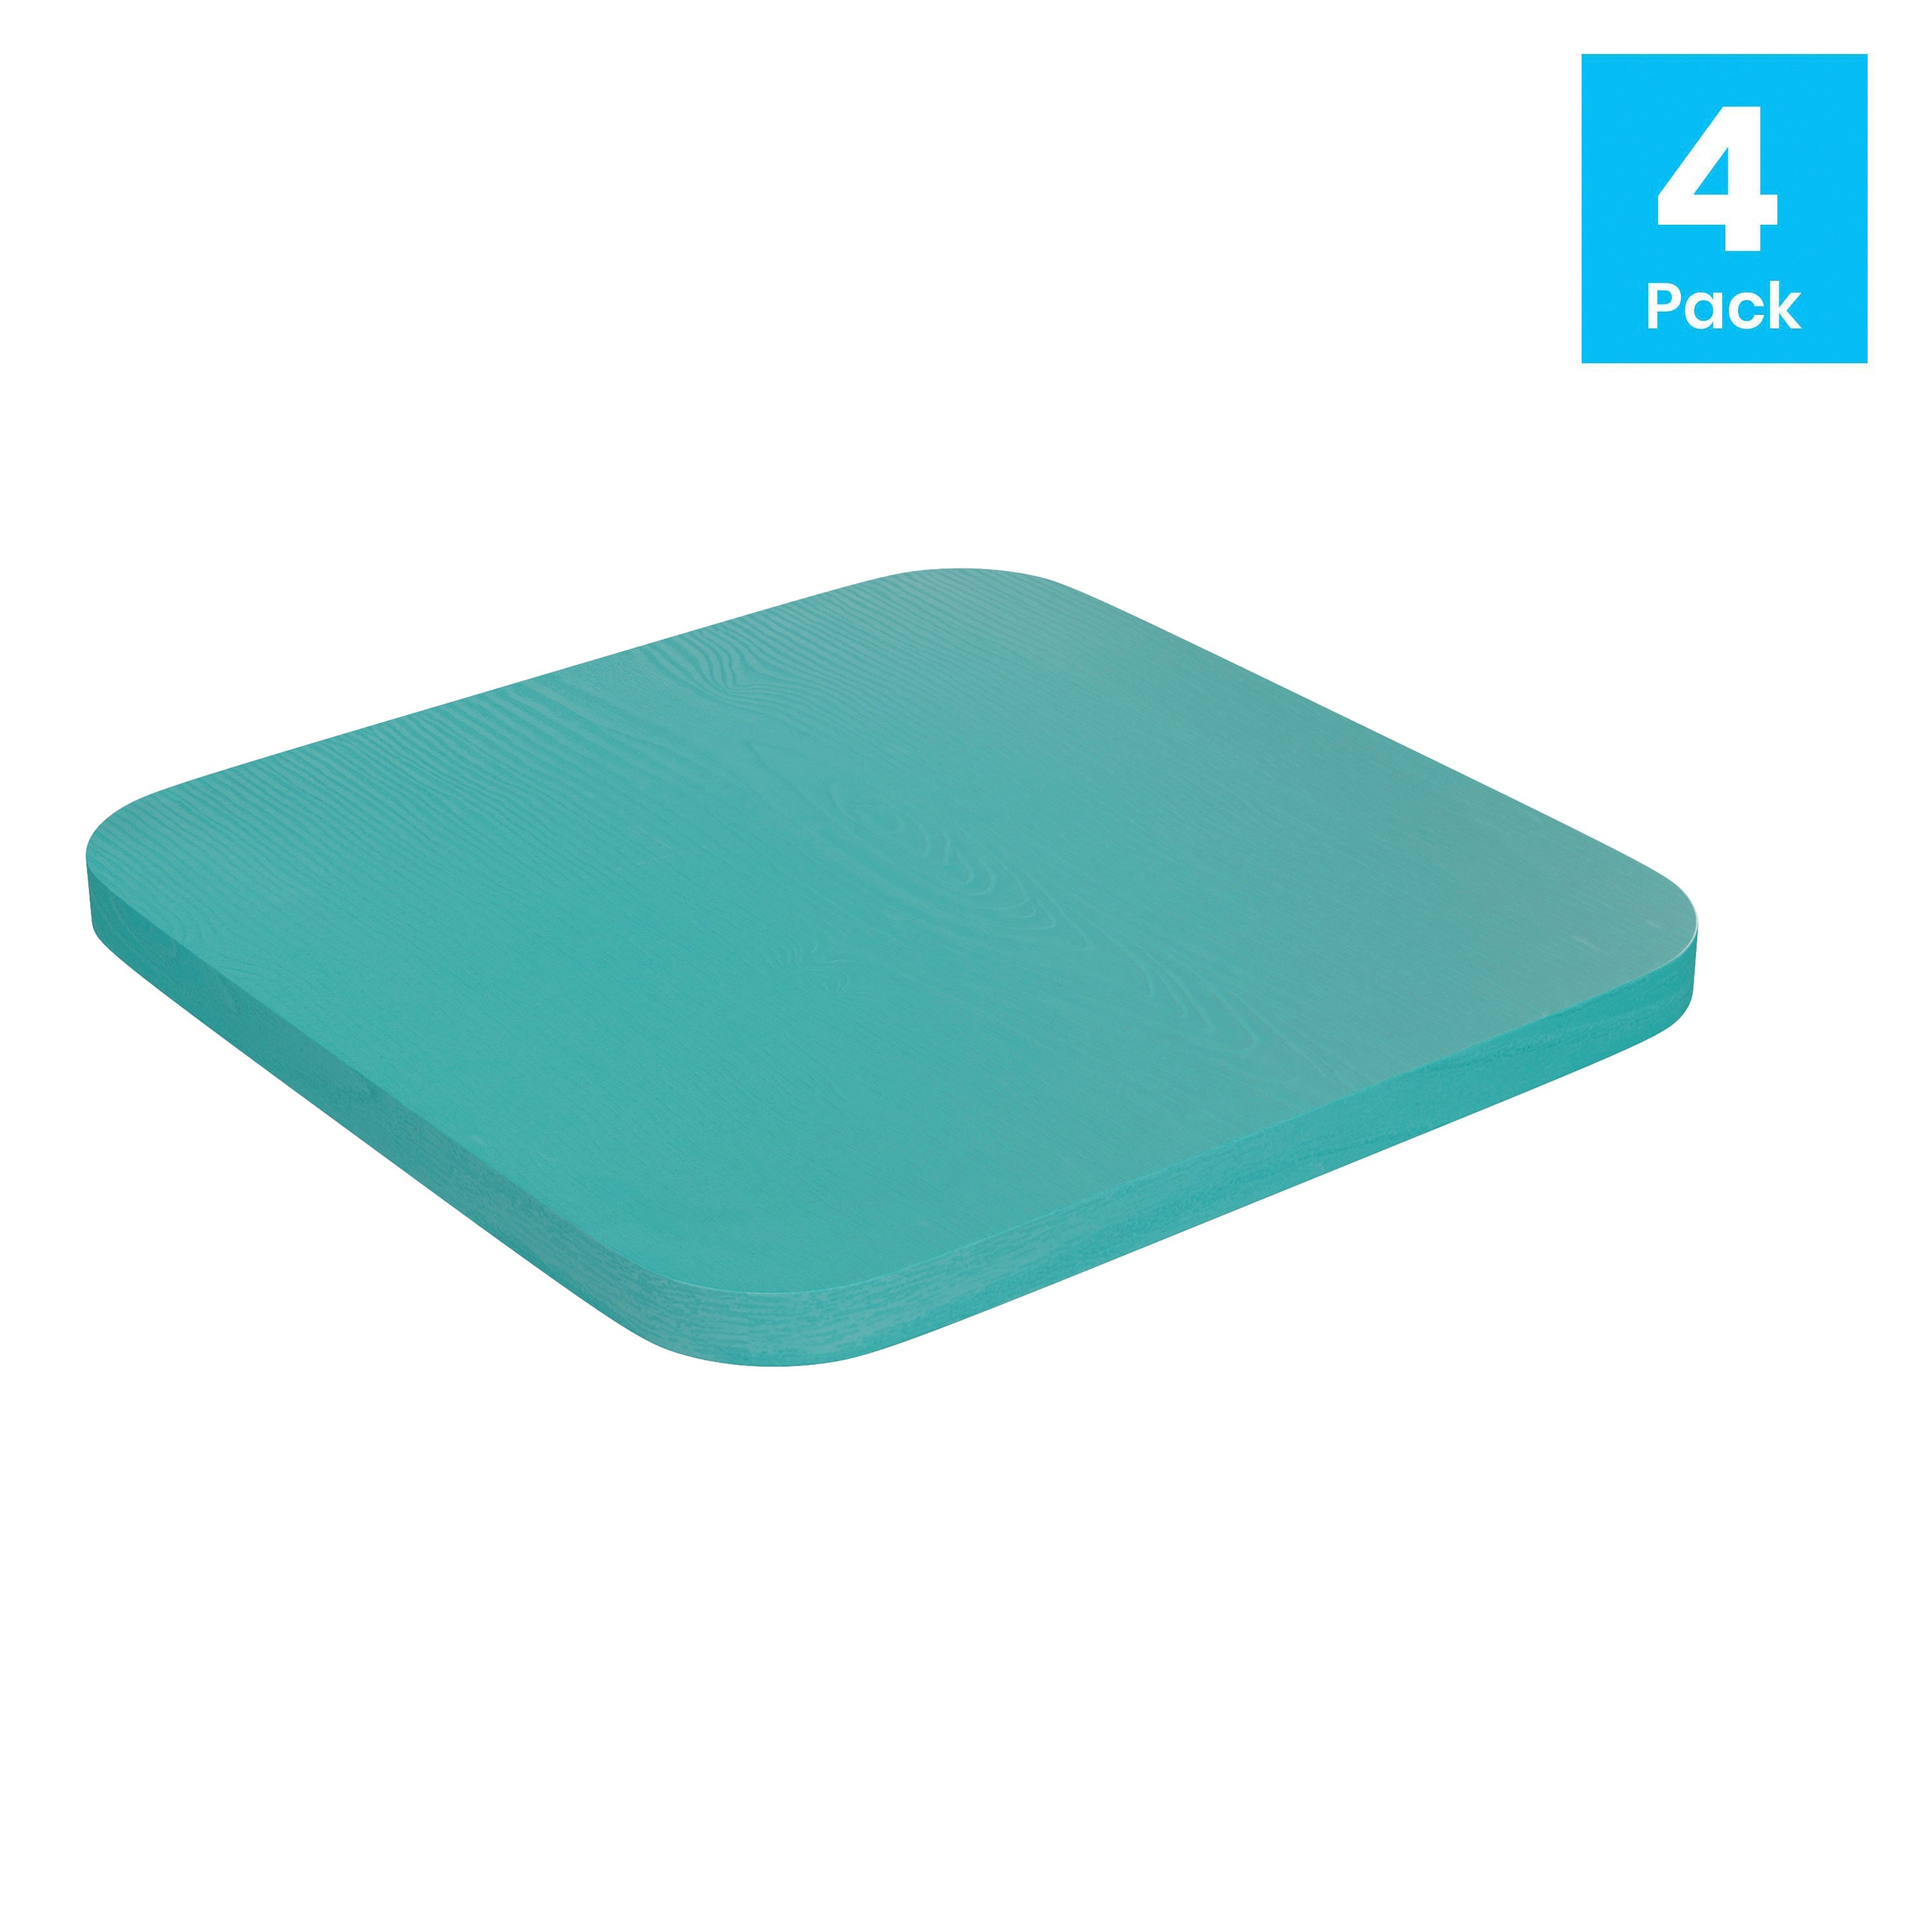 Perry Poly Resin Wood Square Seat with Rounded Edges for Colorful Metal Barstools-Colorful Metal Poly Resin Seats-Flash Furniture-Wall2Wall Furnishings